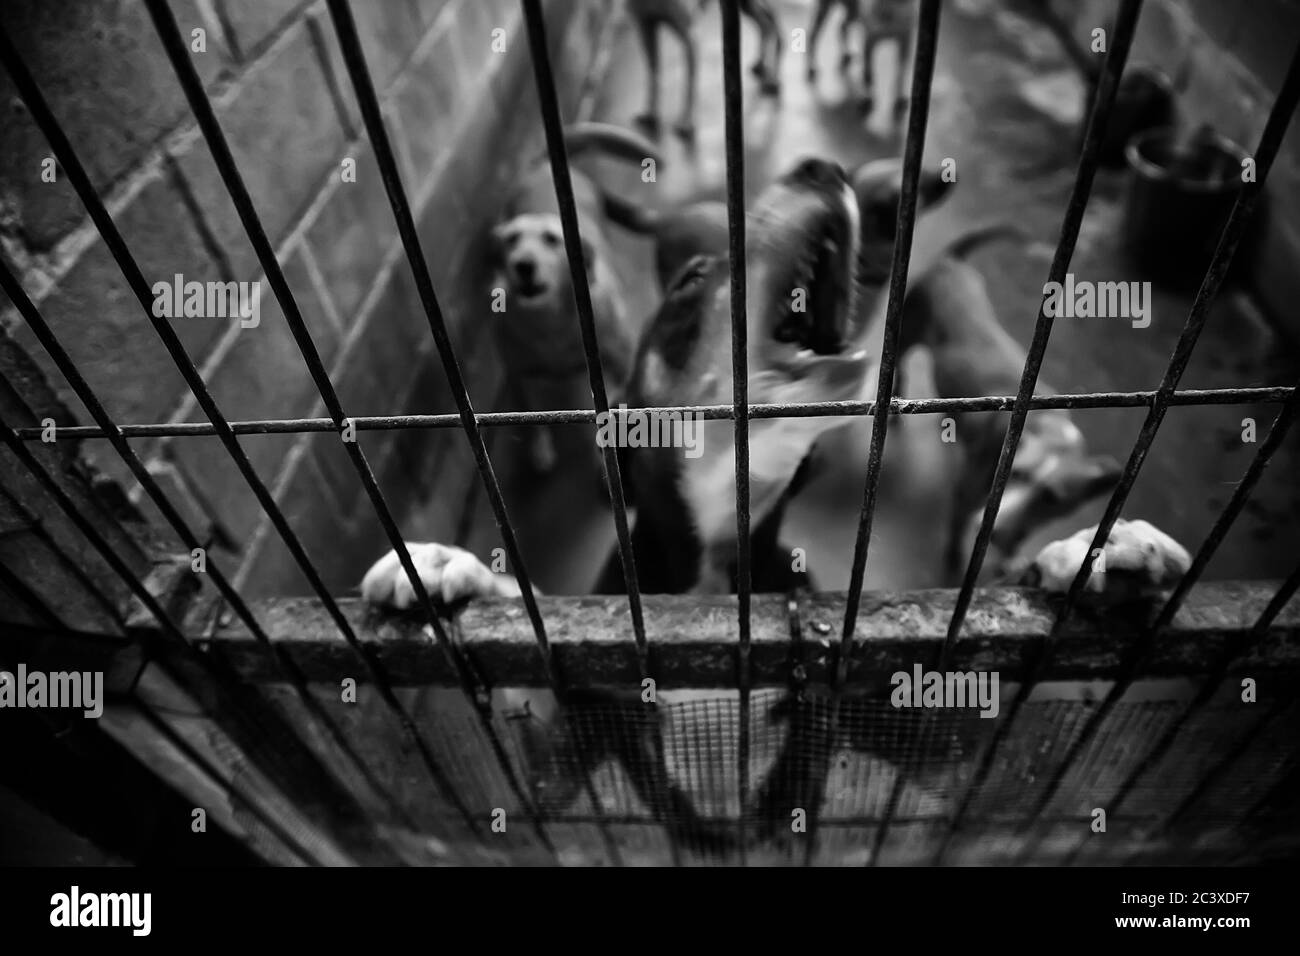 Dog in enclosed kennel, abandoned animals, abuse Stock Photo